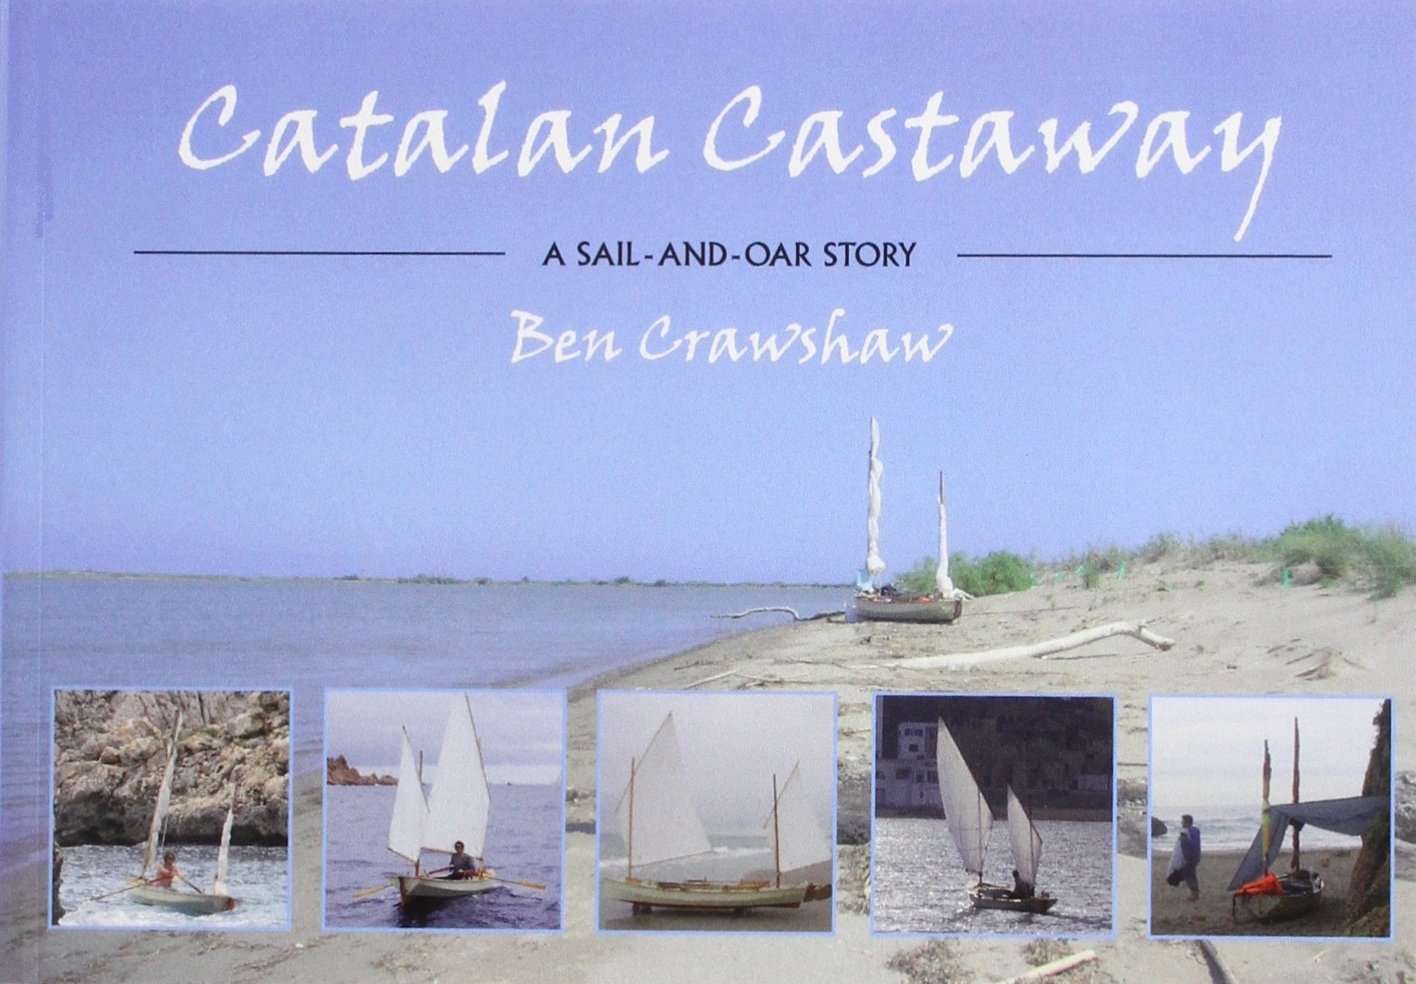 Catalan Castaway: A Sail-and-Oar Story